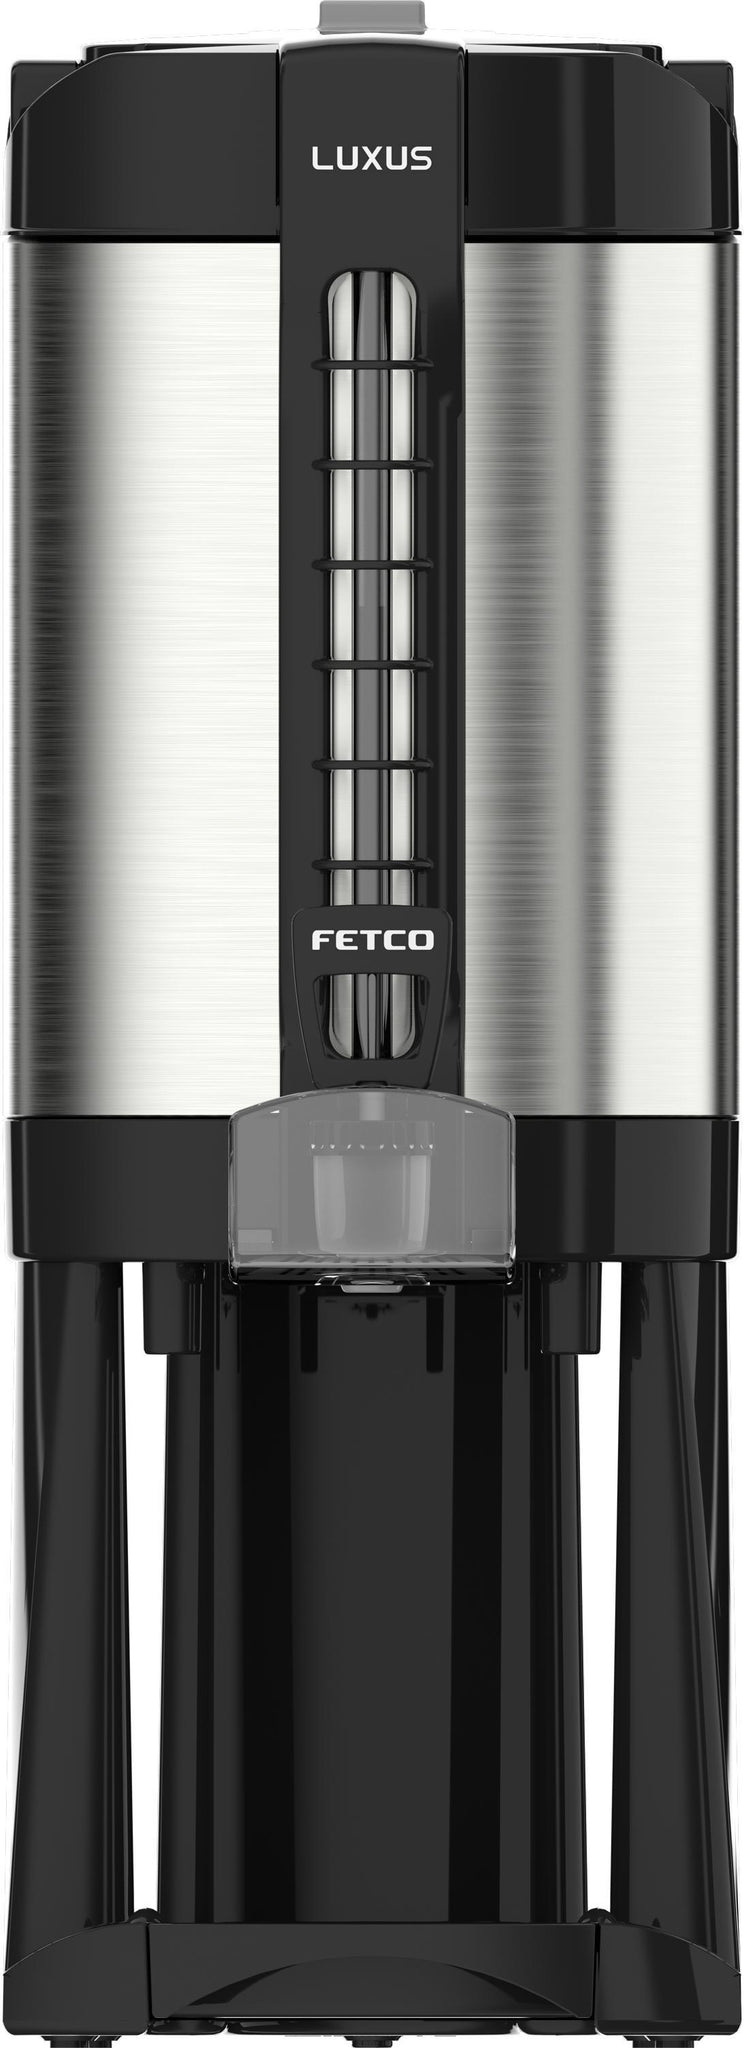 Fetco - 7.6L LUXUS Sight-Gauge Dispenser/Server with Stand - LGD-20